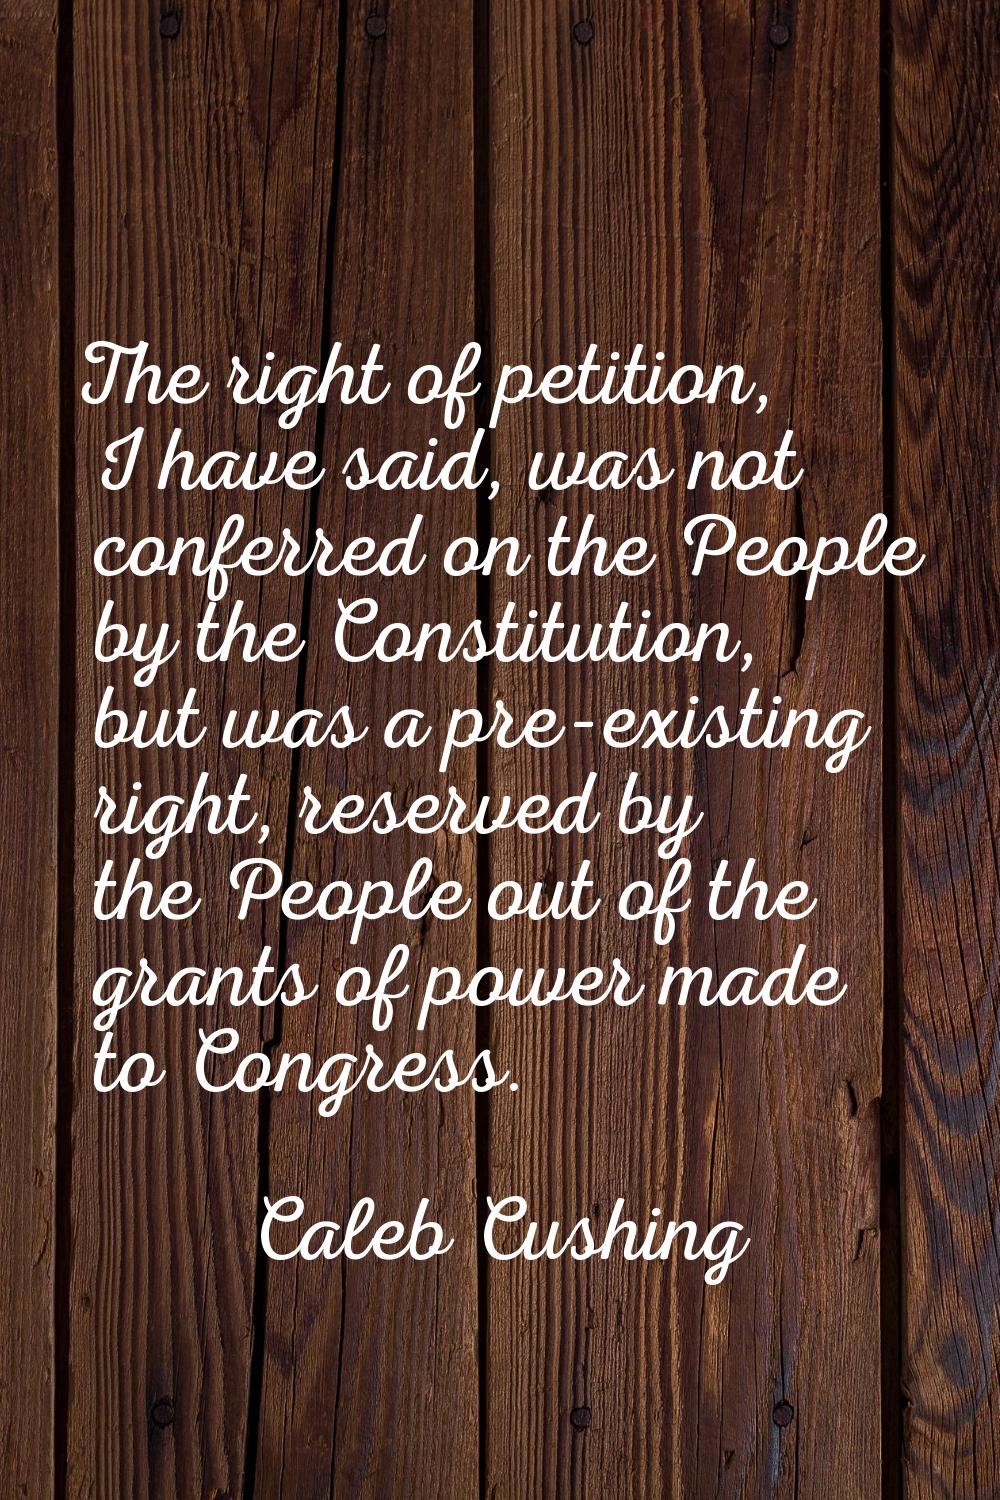 The right of petition, I have said, was not conferred on the People by the Constitution, but was a 